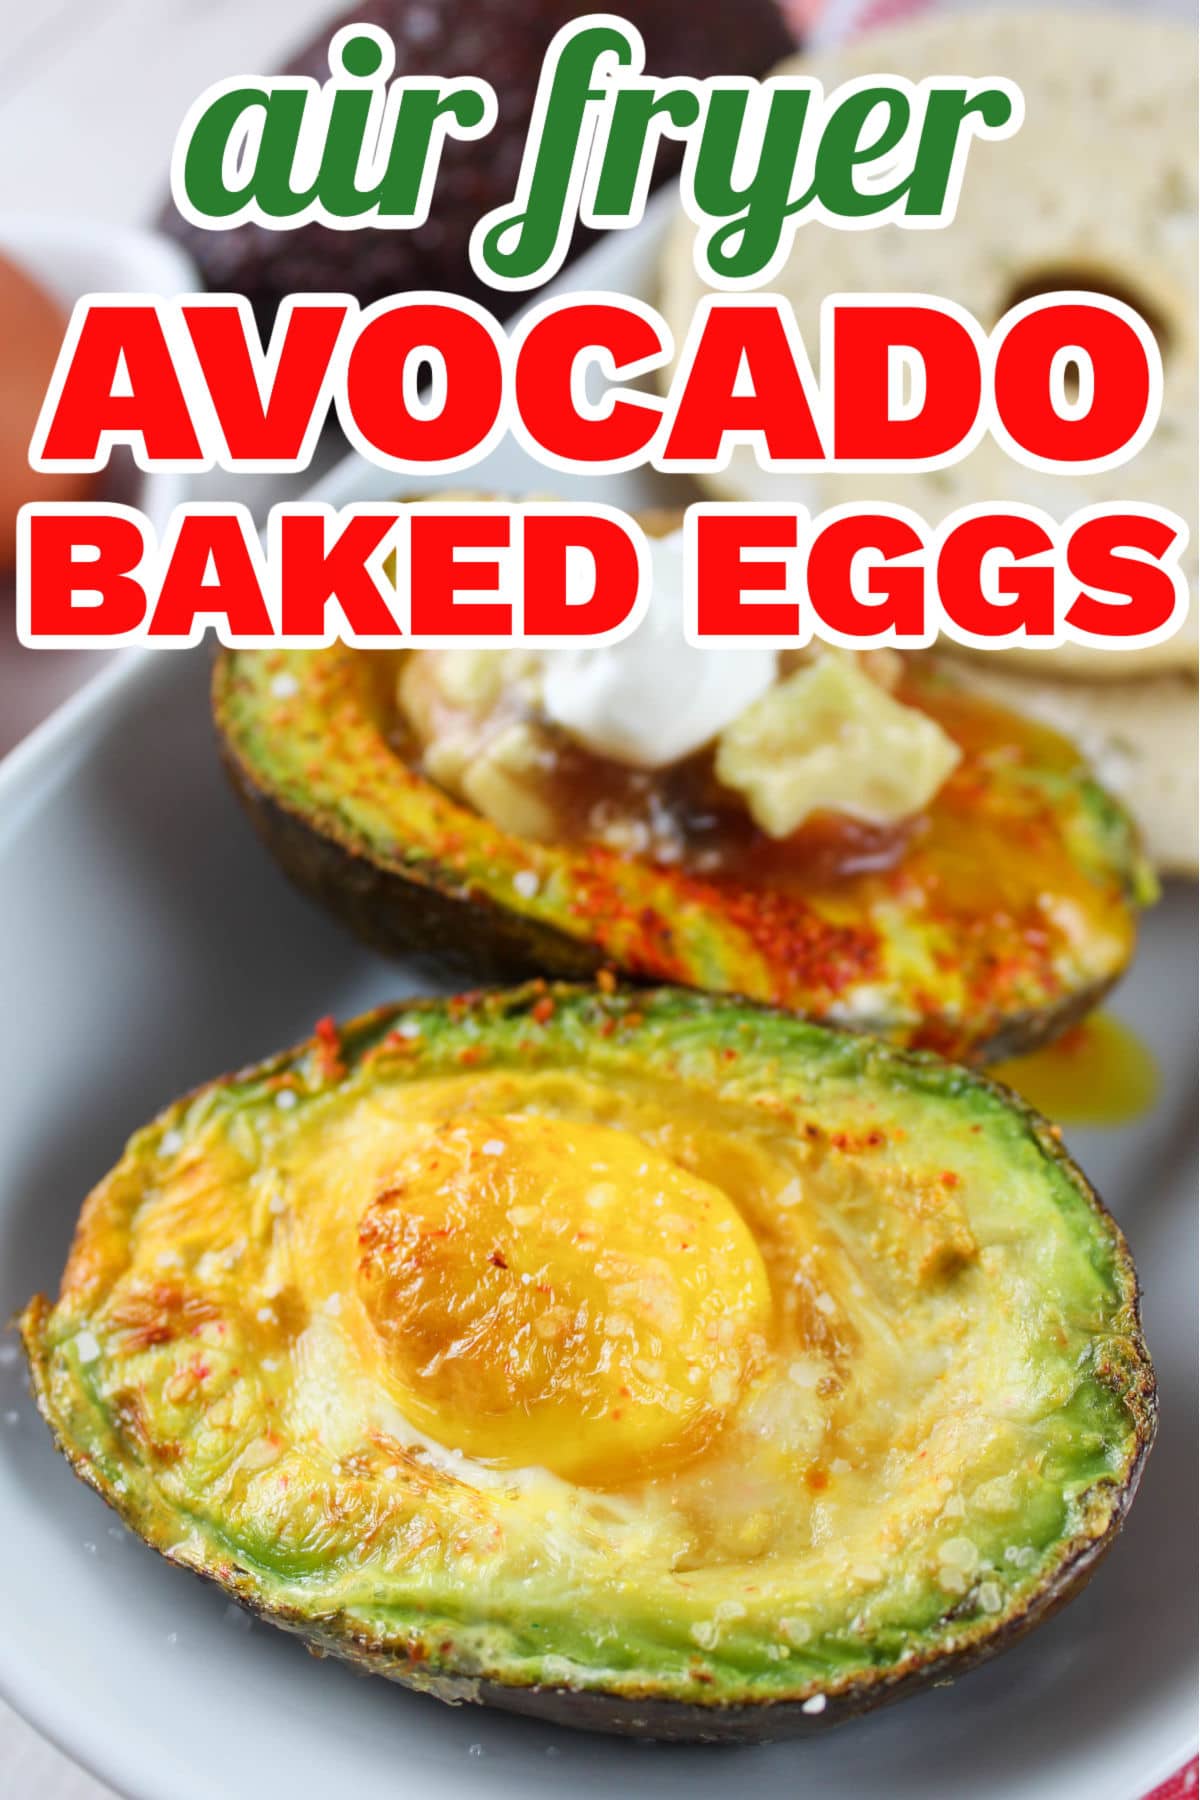 Air Fryer Avocado "Baked" Eggs are my new FAVORITE way to eat eggs! I literally ate them three times last week! It's the perfect start to your morning and the creamy avocados are even better when you air fry them! Who knew?!
 via @foodhussy